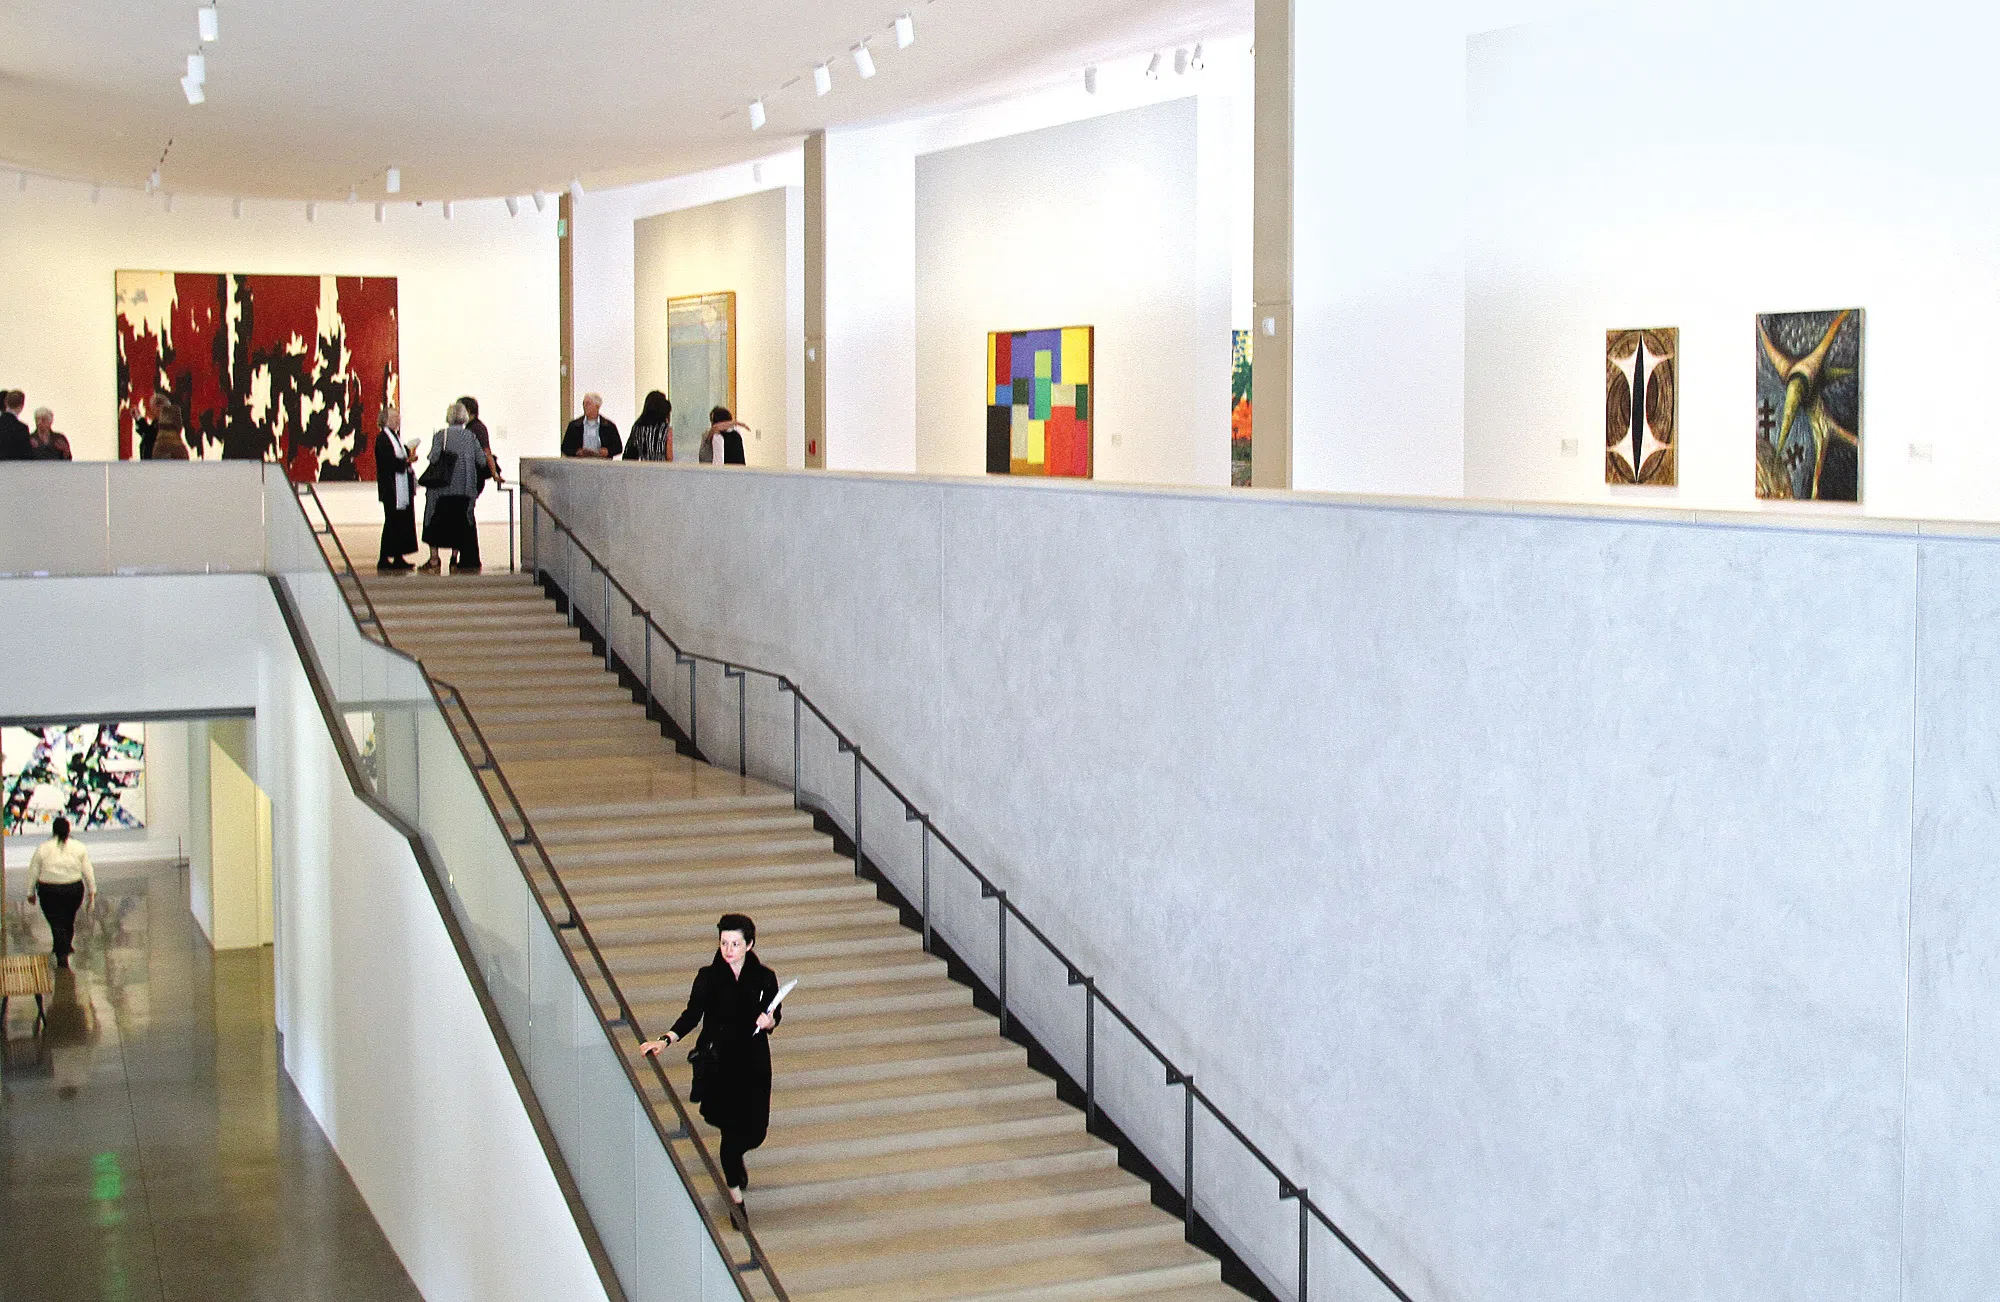 Interior of museum with modern stairwell leading up to second floor gallery displaying modern art paintings